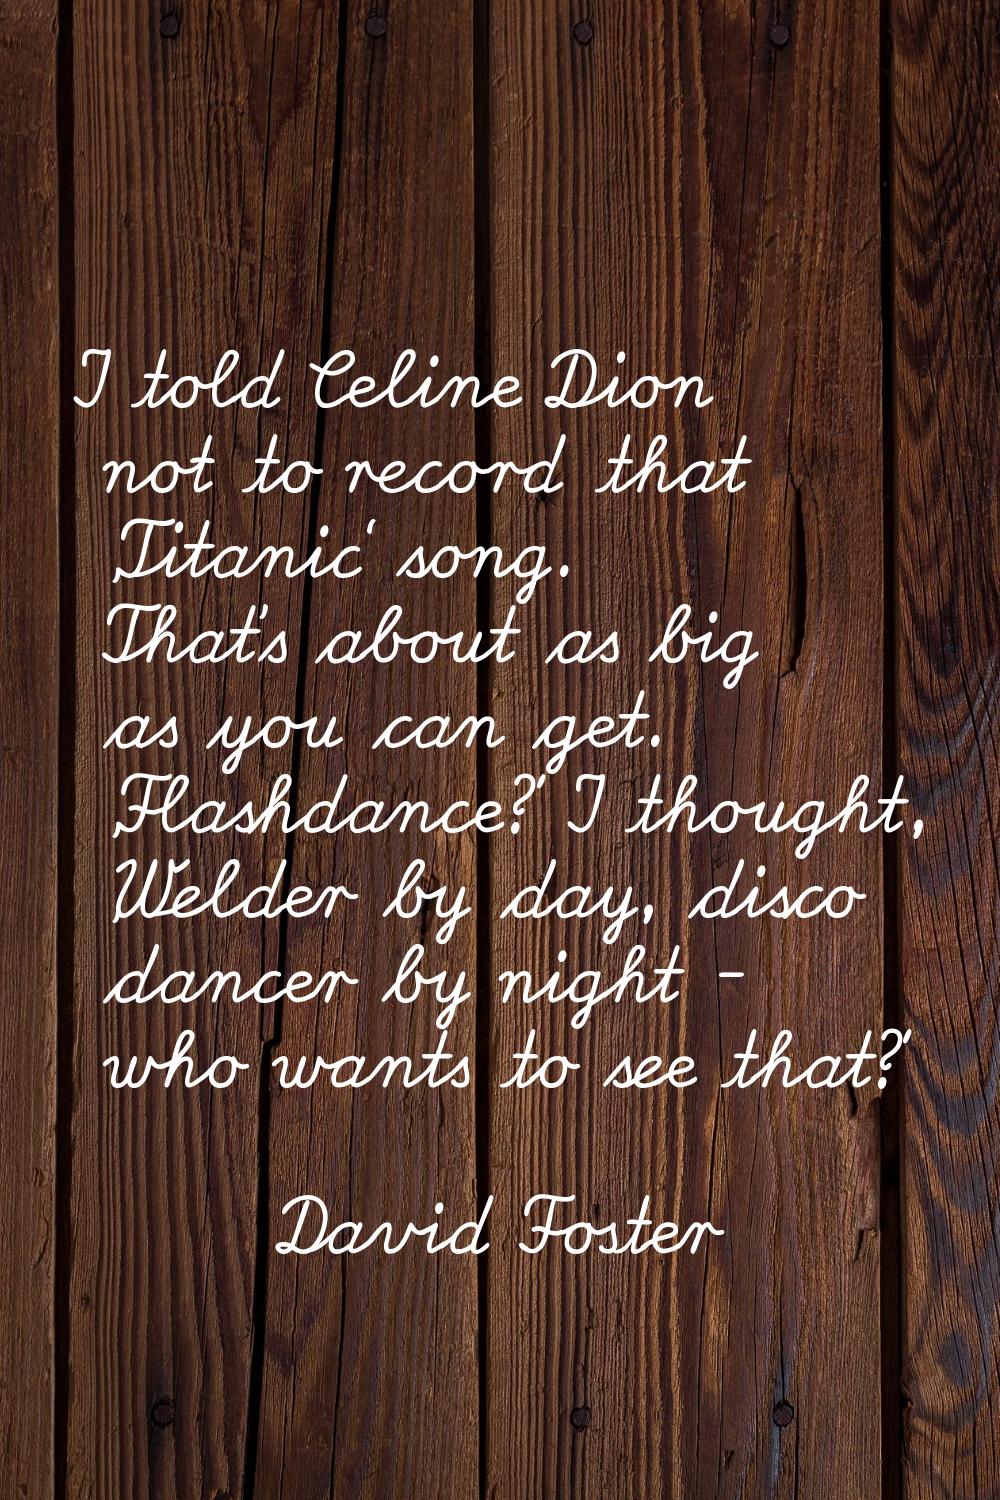 I told Celine Dion not to record that 'Titanic' song. That's about as big as you can get. 'Flashdan